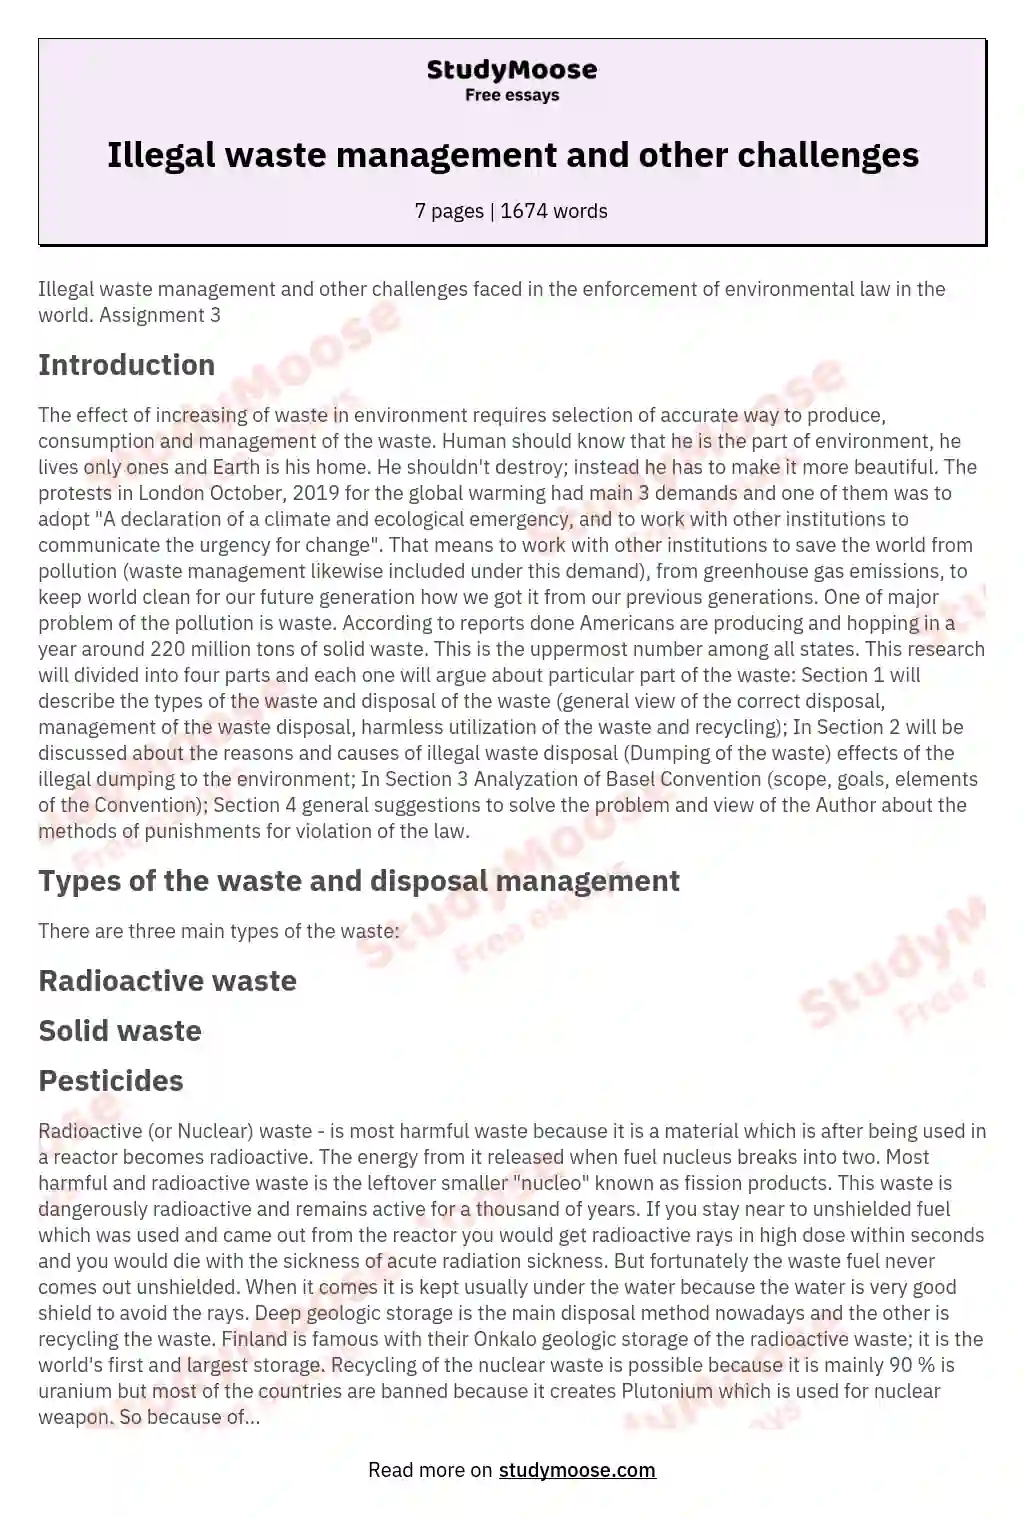 Illegal waste management and other challenges essay